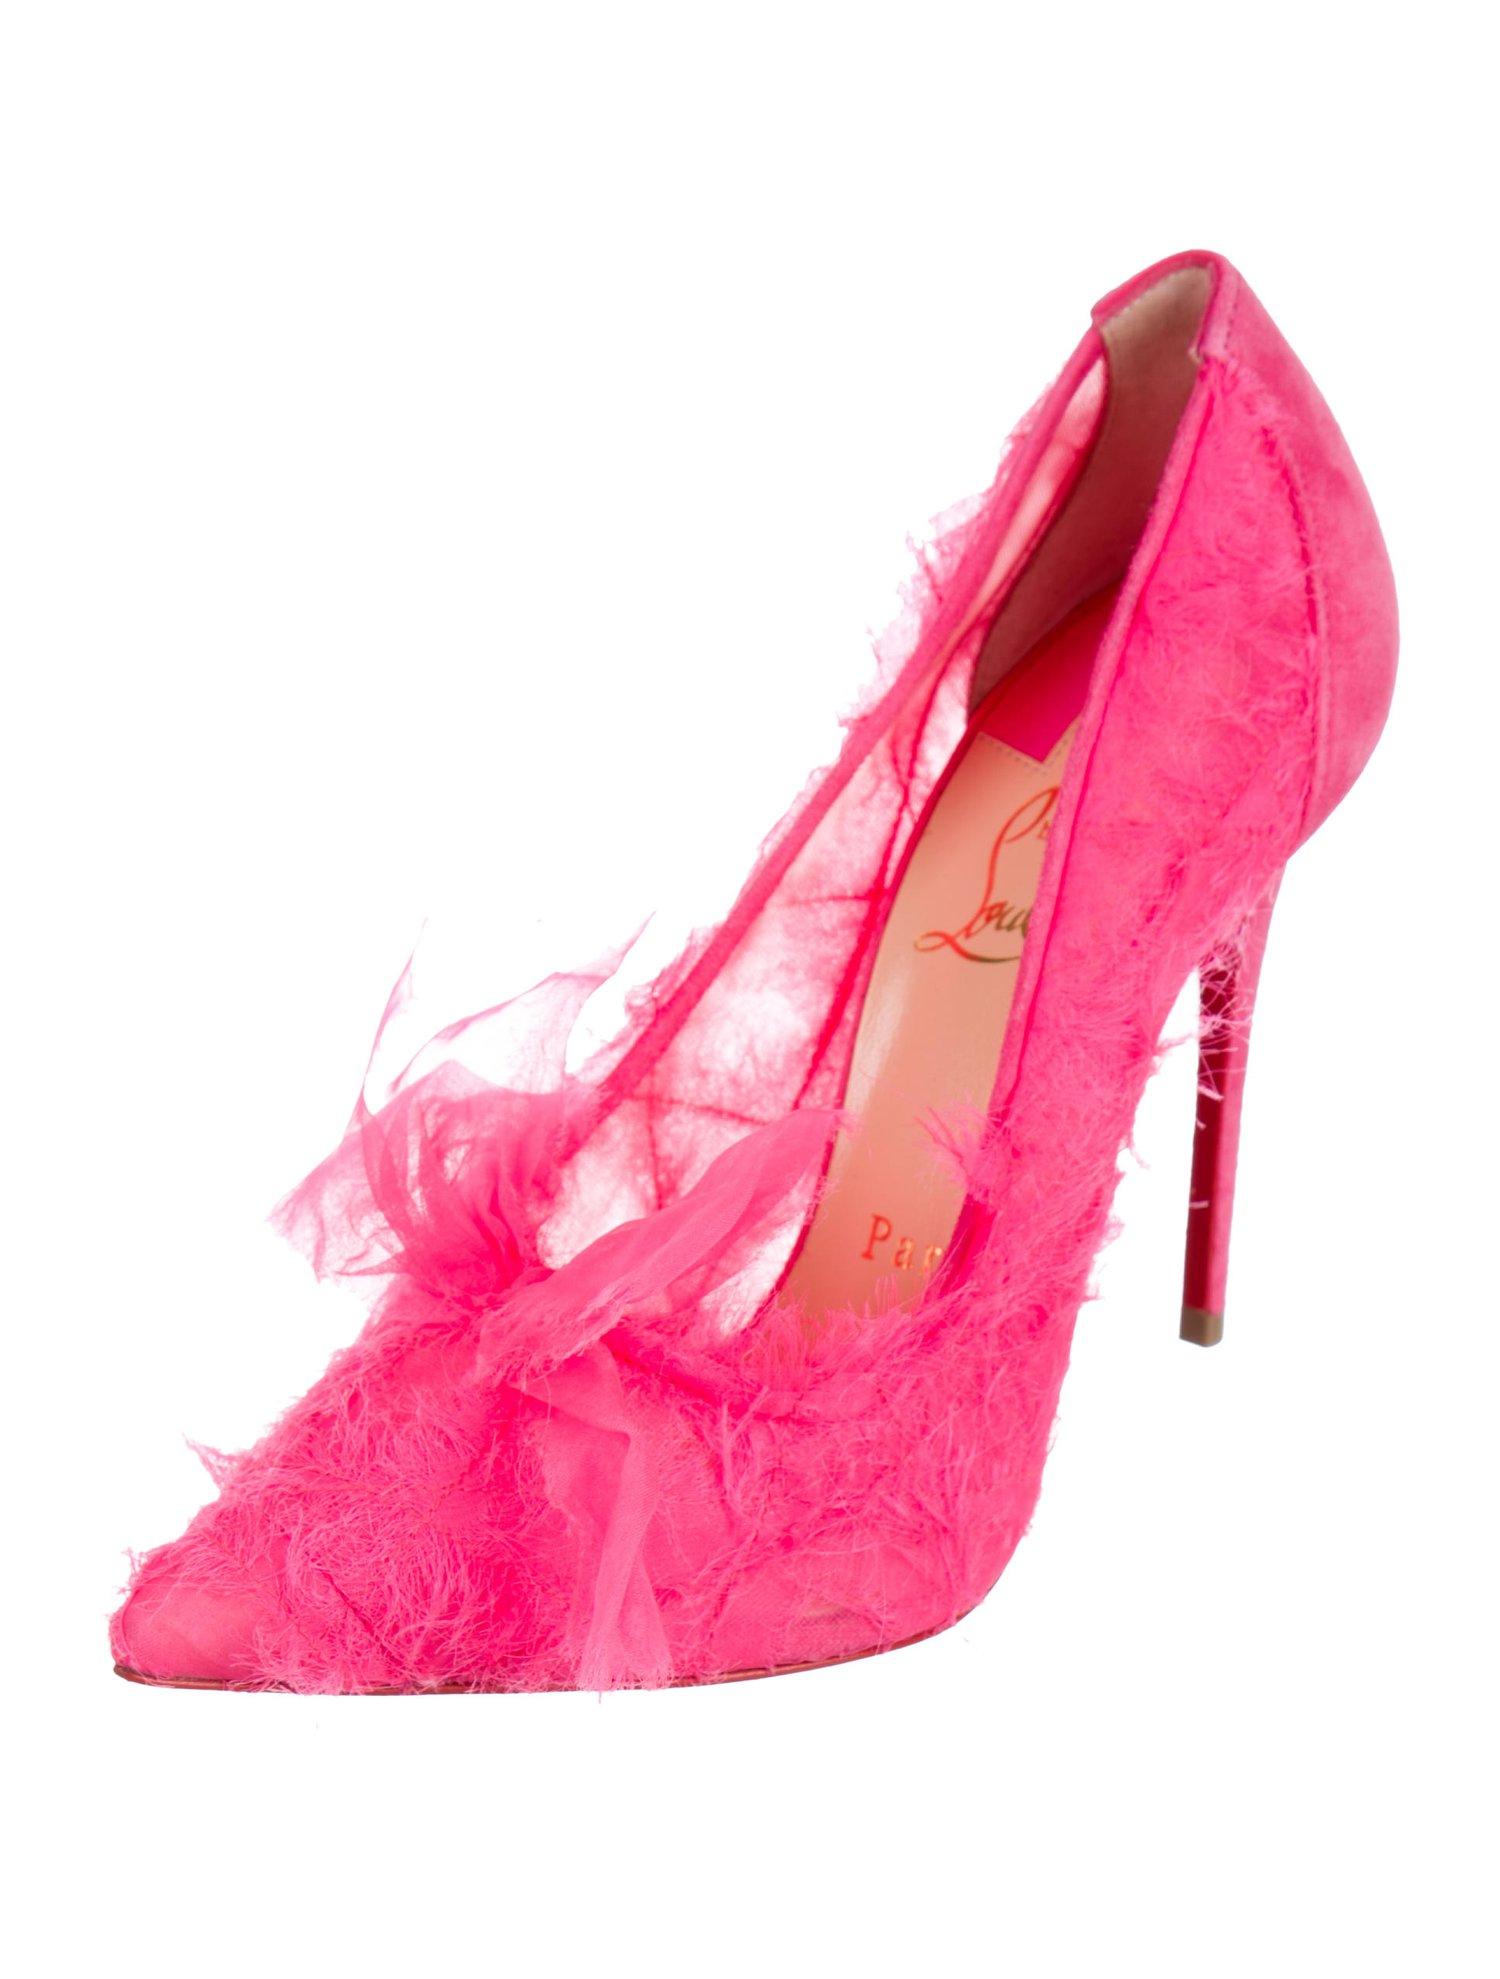 Christian Louboutin NEW Pink Suede Woven Chiffon Evening Heels Pumps in Box

Size IT 36
Woven
Suede
Chiffon
Made in Italy
Heel height 4